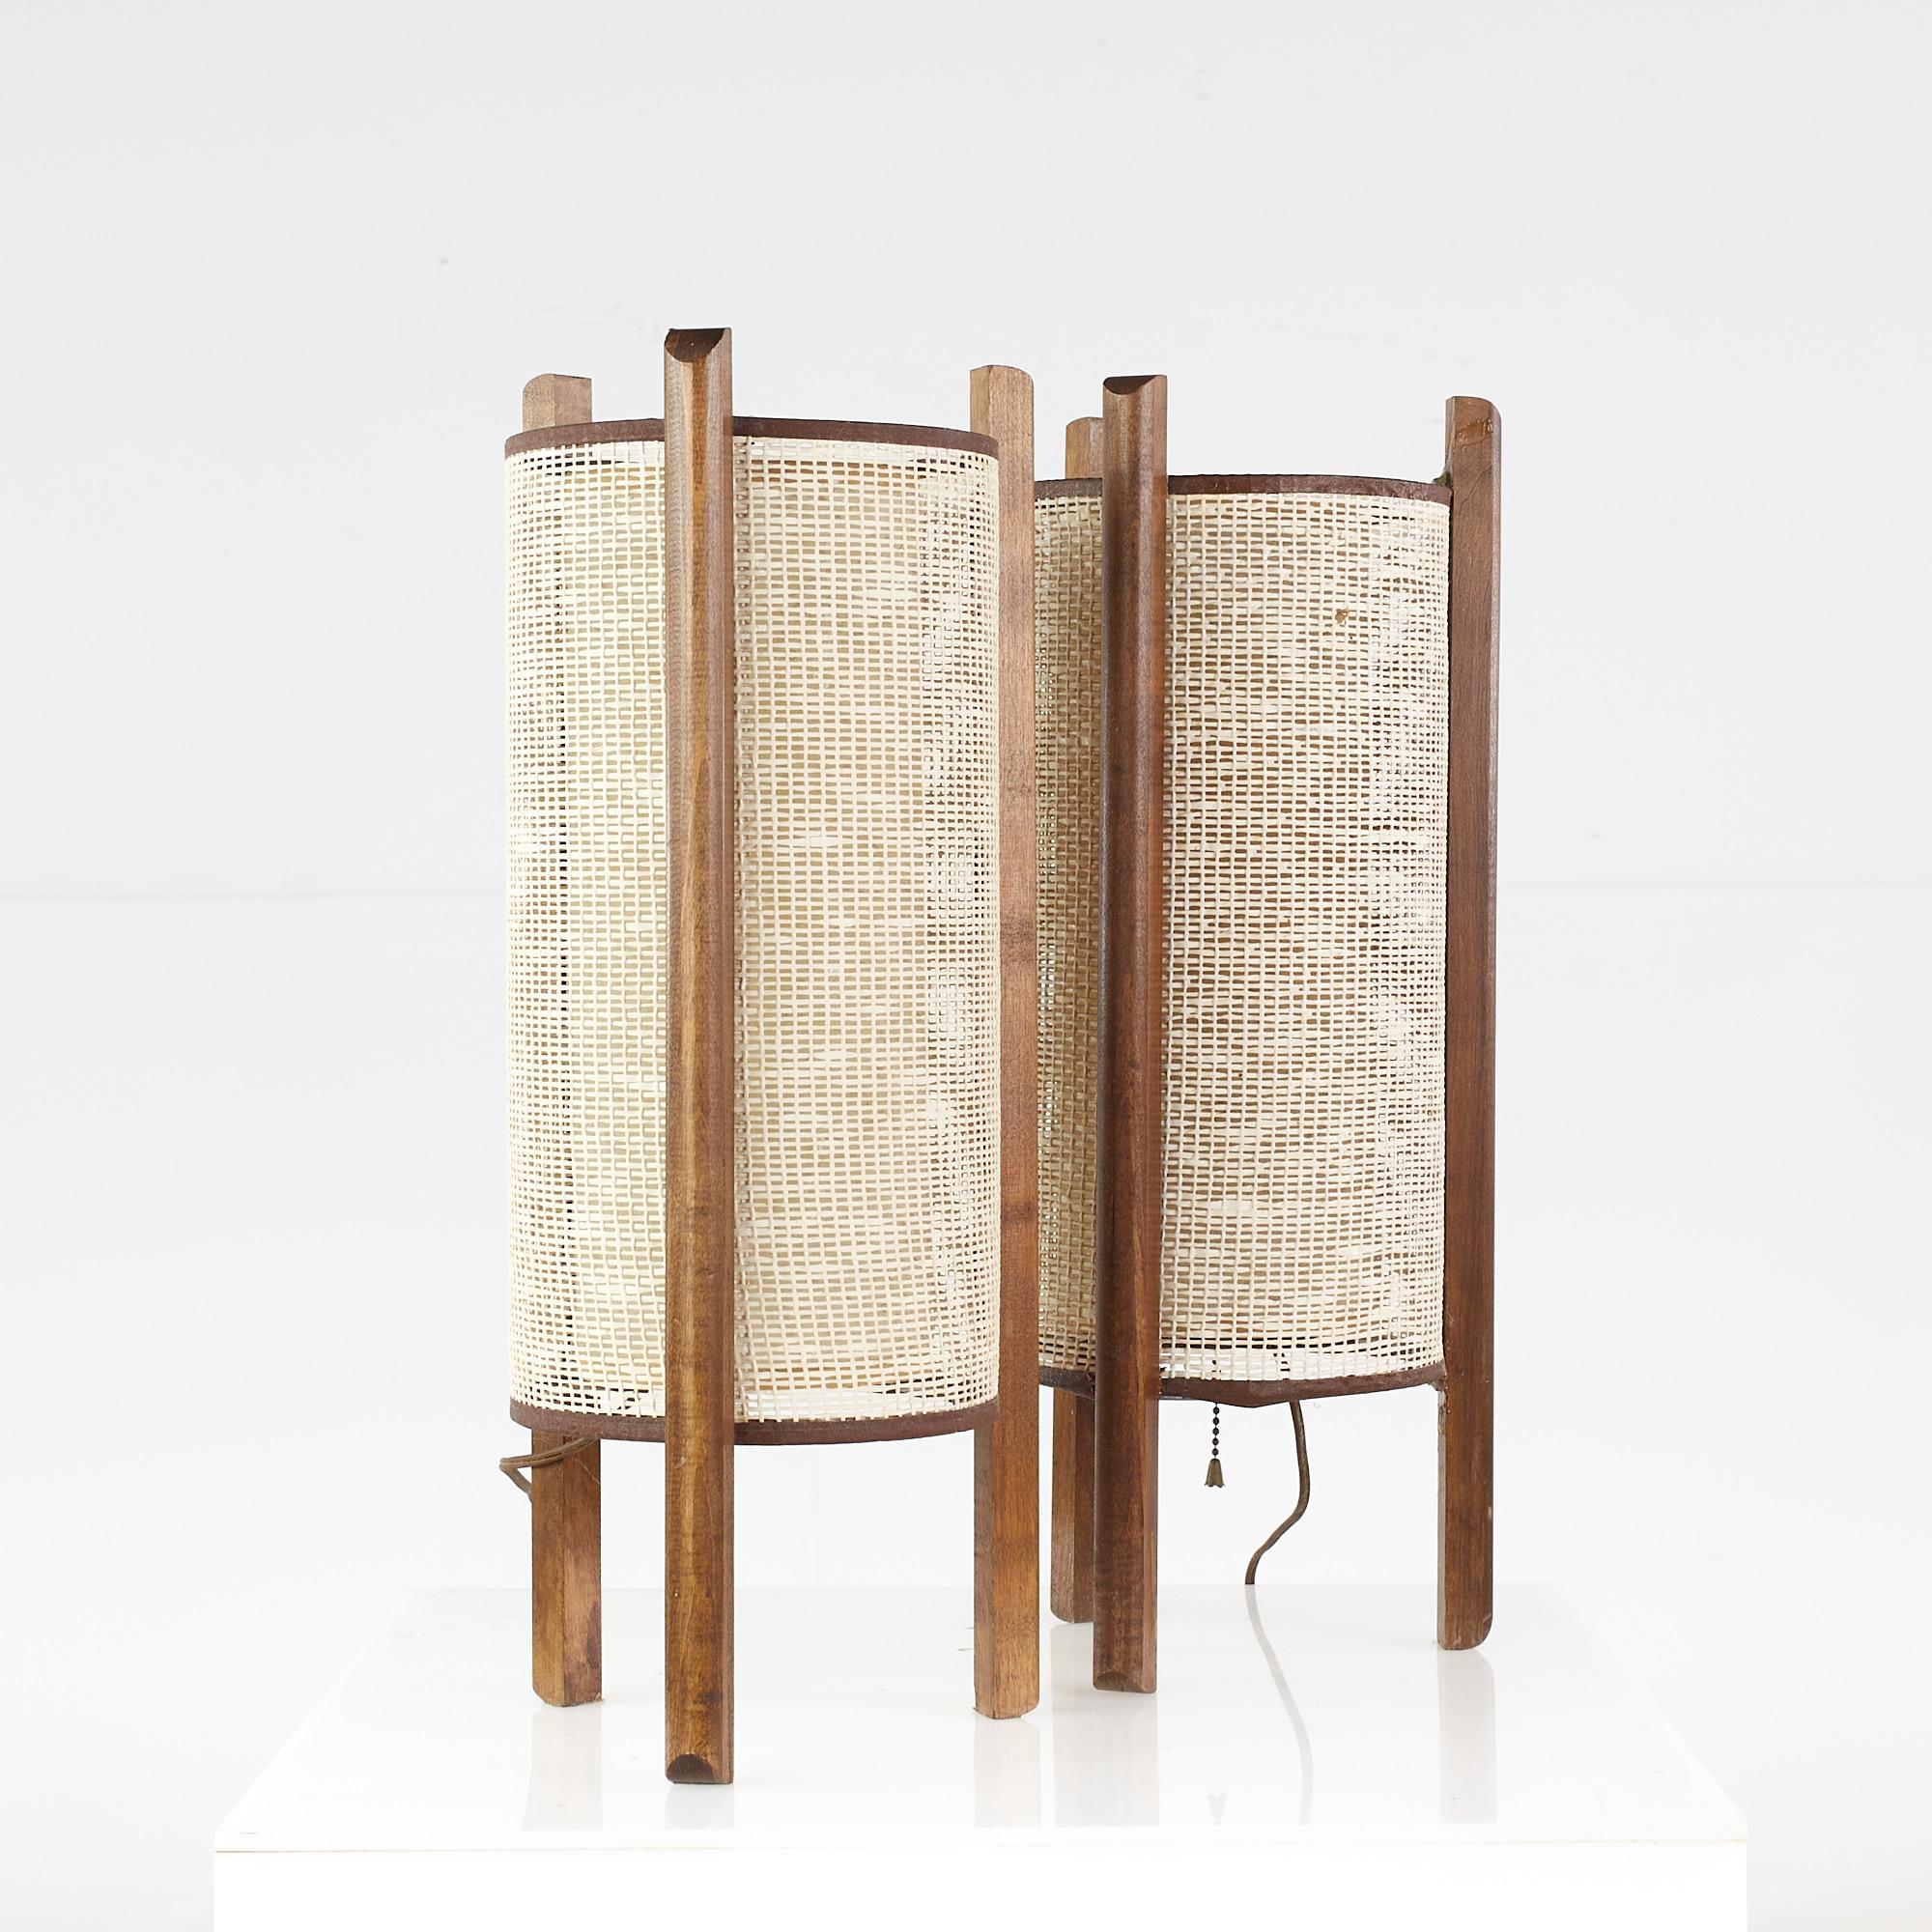 Noguchi style mid-century cylinder lamps - pair.

Each lamp measures: 8 wide x 8 deep x 20 inches high.

Good vintage condition. Scuffs to wood, insignificant holes in rattan, dried glue spot on one.

We take our photos in a controlled